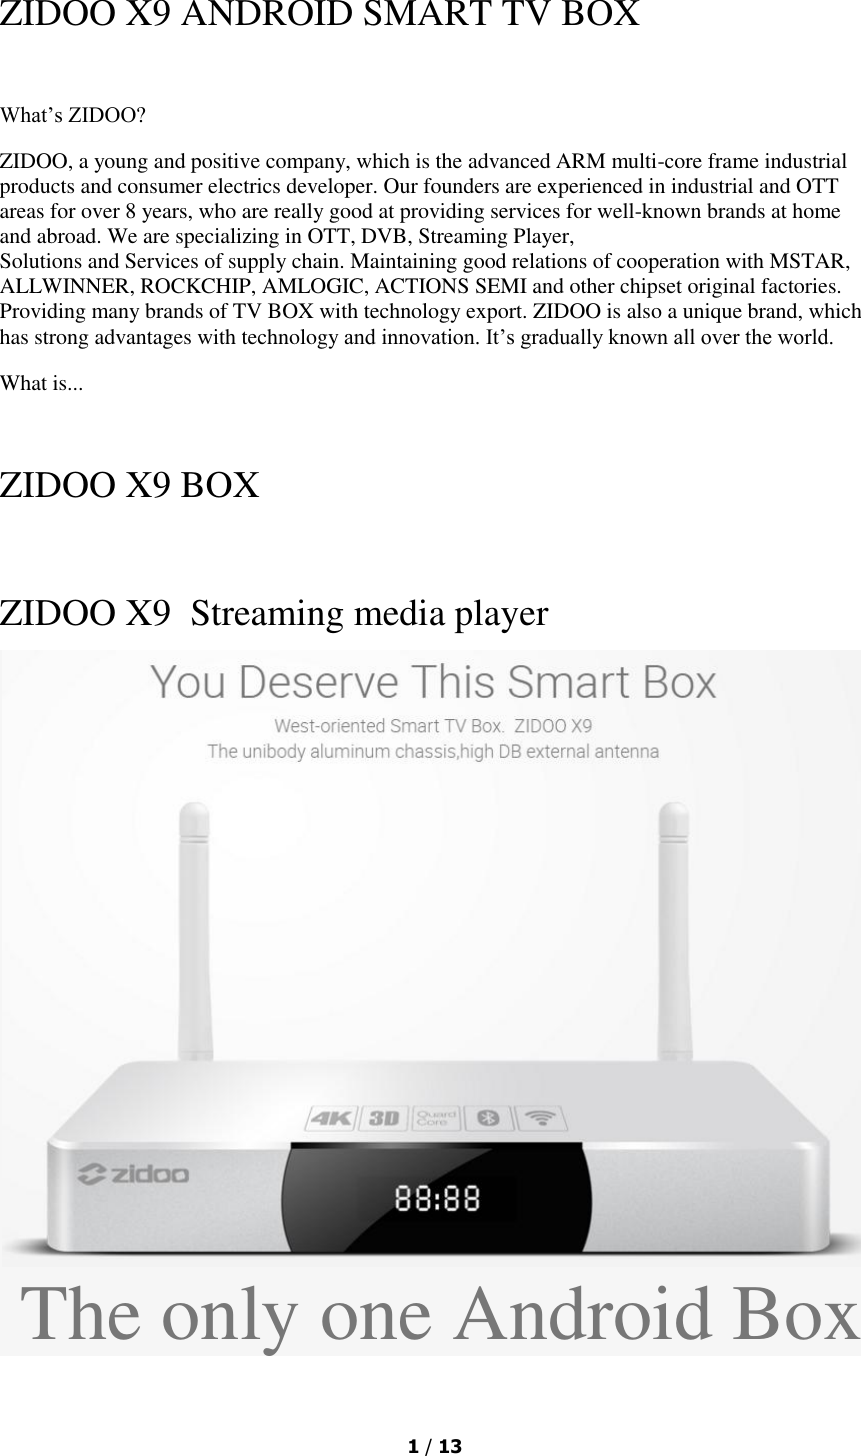  1 / 13  ZIDOO X9 ANDROID SMART TV BOX  What’s ZIDOO? ZIDOO, a young and positive company, which is the advanced ARM multi-core frame industrial products and consumer electrics developer. Our founders are experienced in industrial and OTT areas for over 8 years, who are really good at providing services for well-known brands at home and abroad. We are specializing in OTT, DVB, Streaming Player, Solutions and Services of supply chain. Maintaining good relations of cooperation with MSTAR,  ALLWINNER, ROCKCHIP, AMLOGIC, ACTIONS SEMI and other chipset original factories. Providing many brands of TV BOX with technology export. ZIDOO is also a unique brand, which has strong advantages with technology and innovation. It’s gradually known all over the world. What is...   ZIDOO X9 BOX  ZIDOO X9  Streaming media player  The only one Android Box 